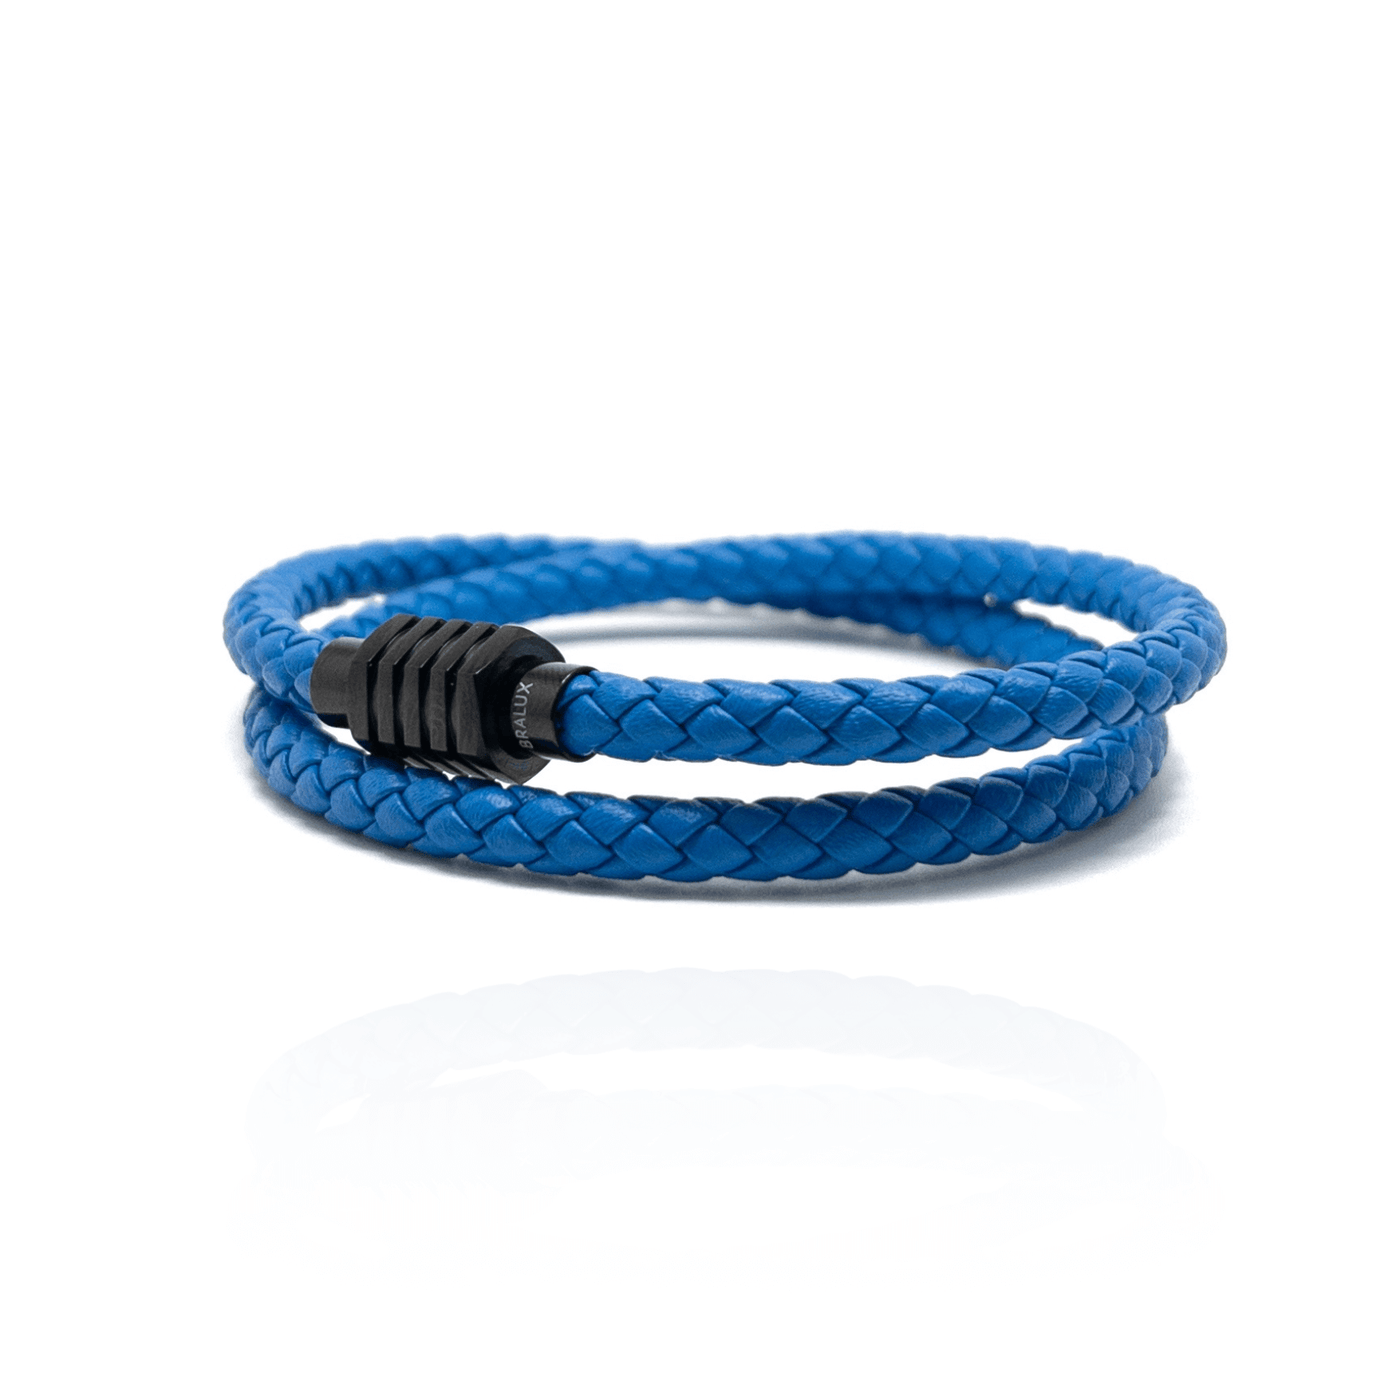 The Blue duo and Black Plated Buckle Leather bracelet